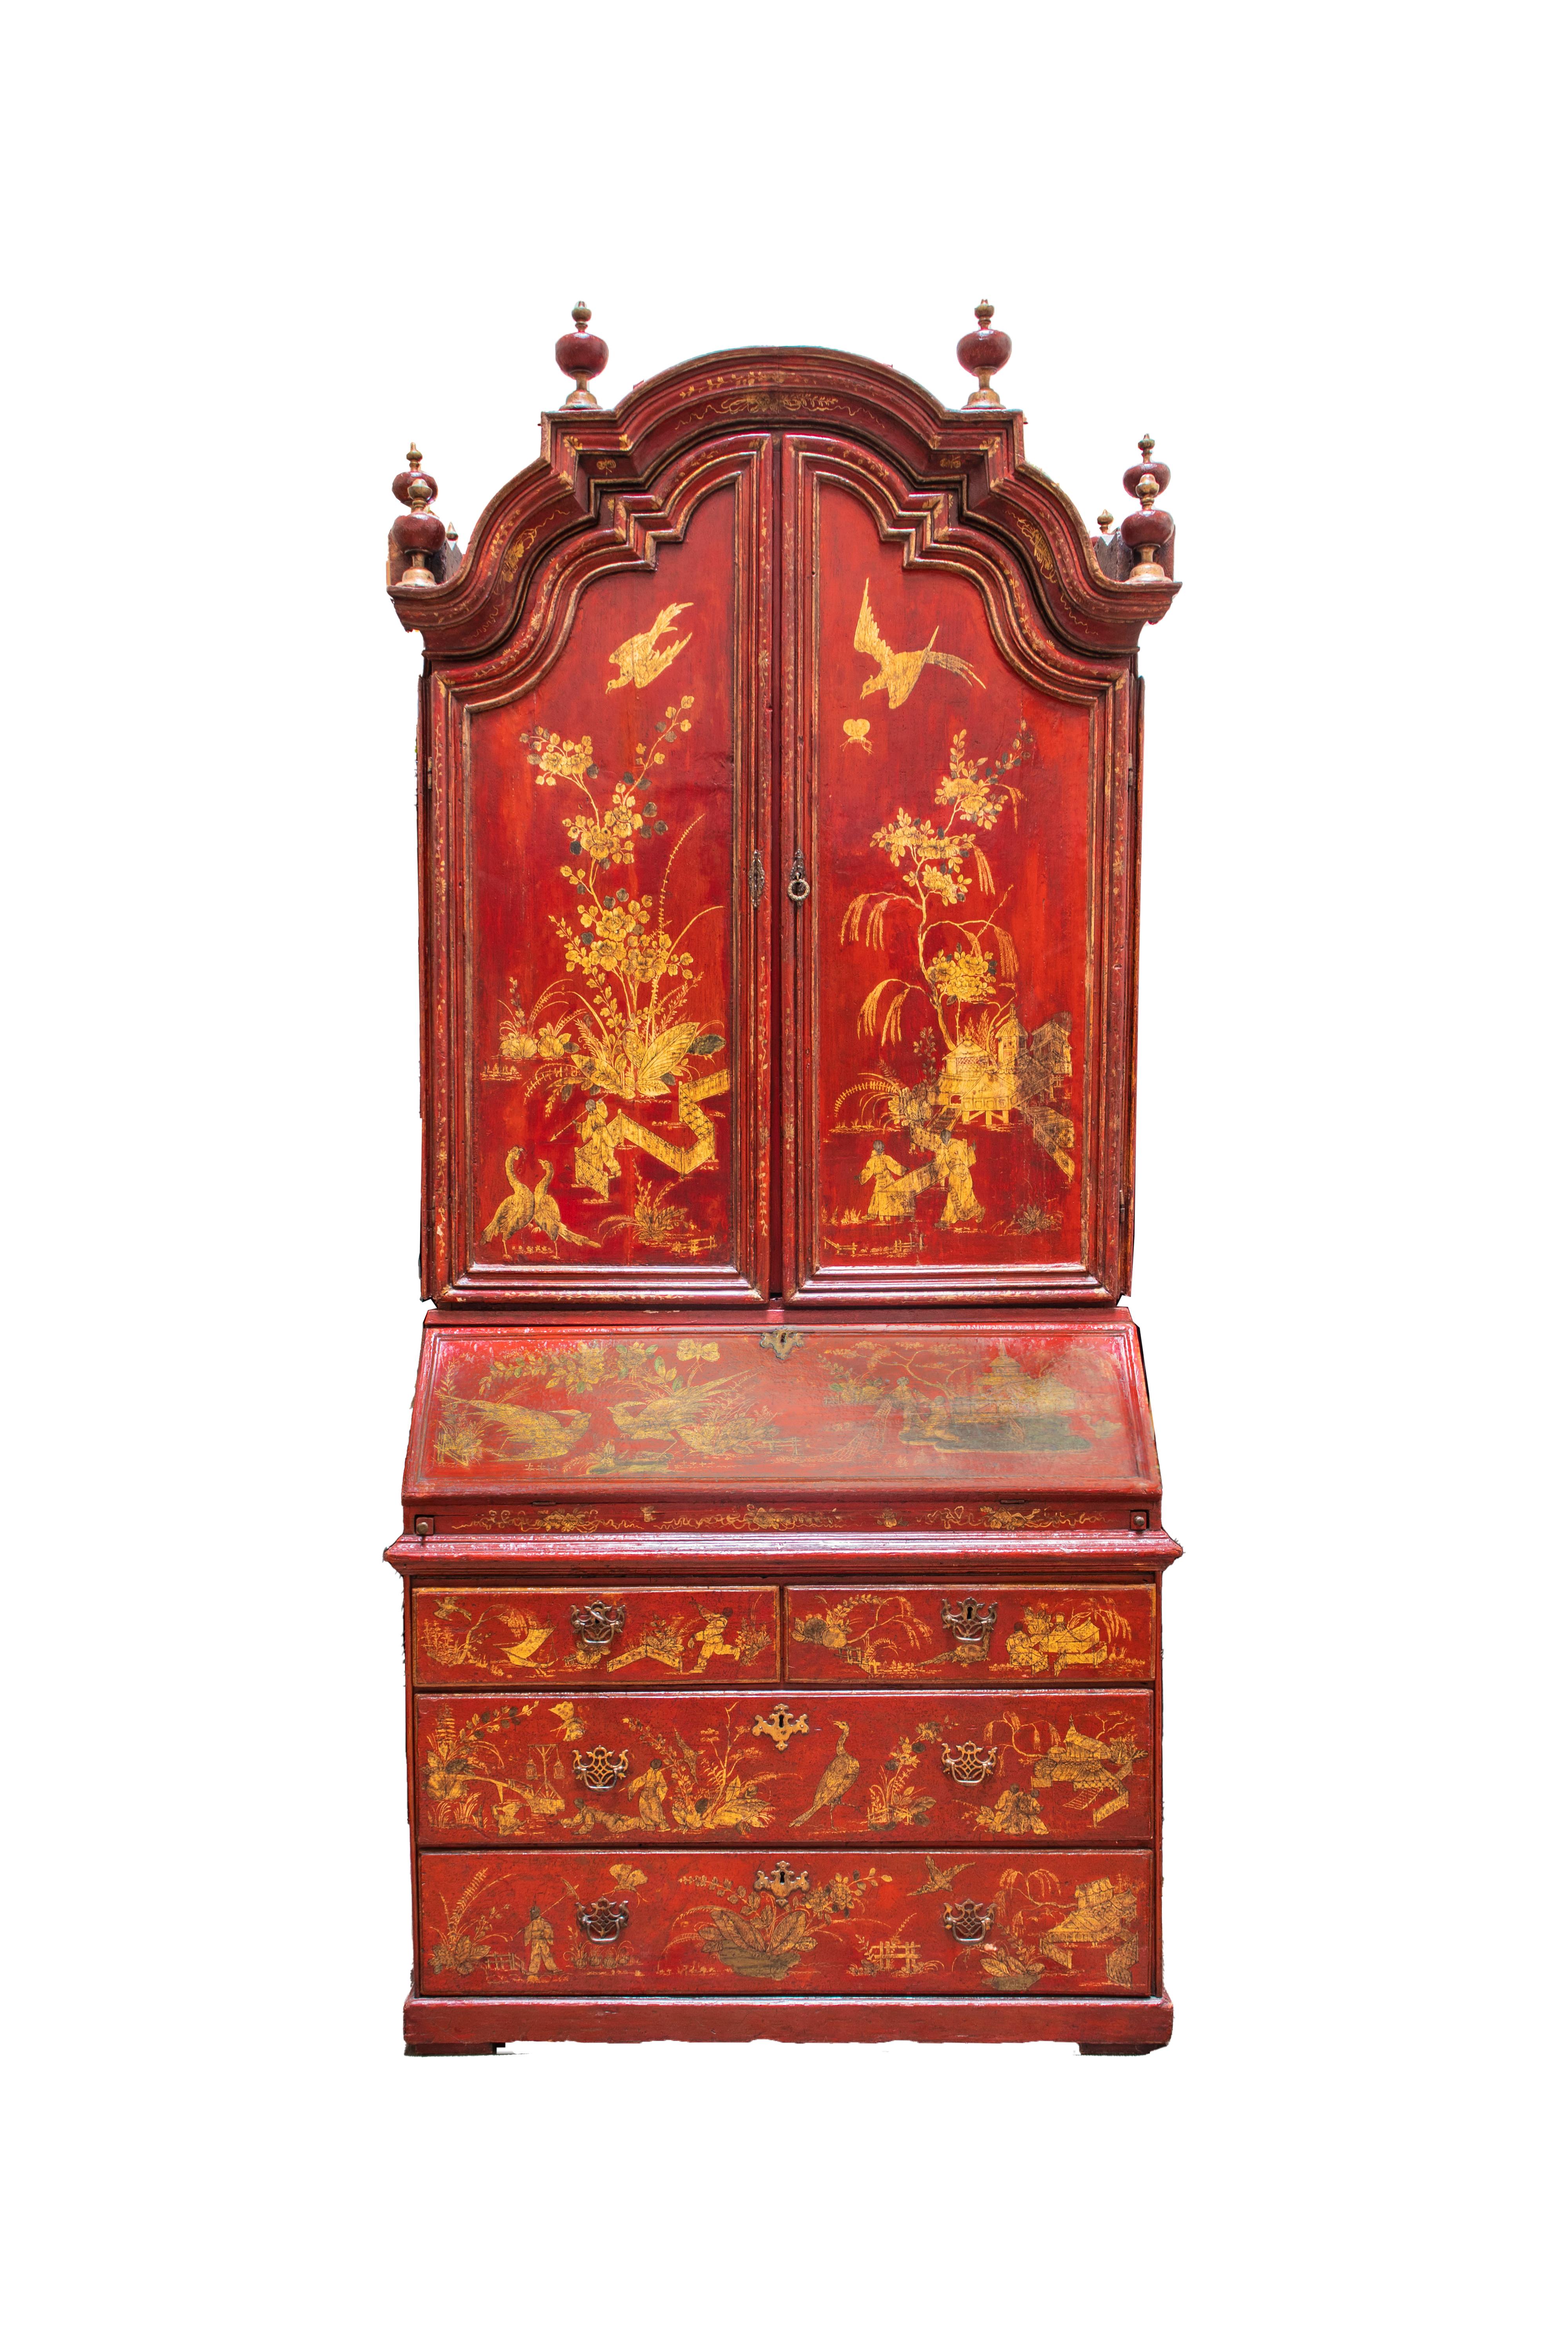 Fine Queen Anne style red Japanned Chinoiserie secretary cabinet. The triple domed top with eight urn finials over two doors, opening interior adorned with hand-painted landscape and floral motifs.  The base with hinged slant lid writing surface